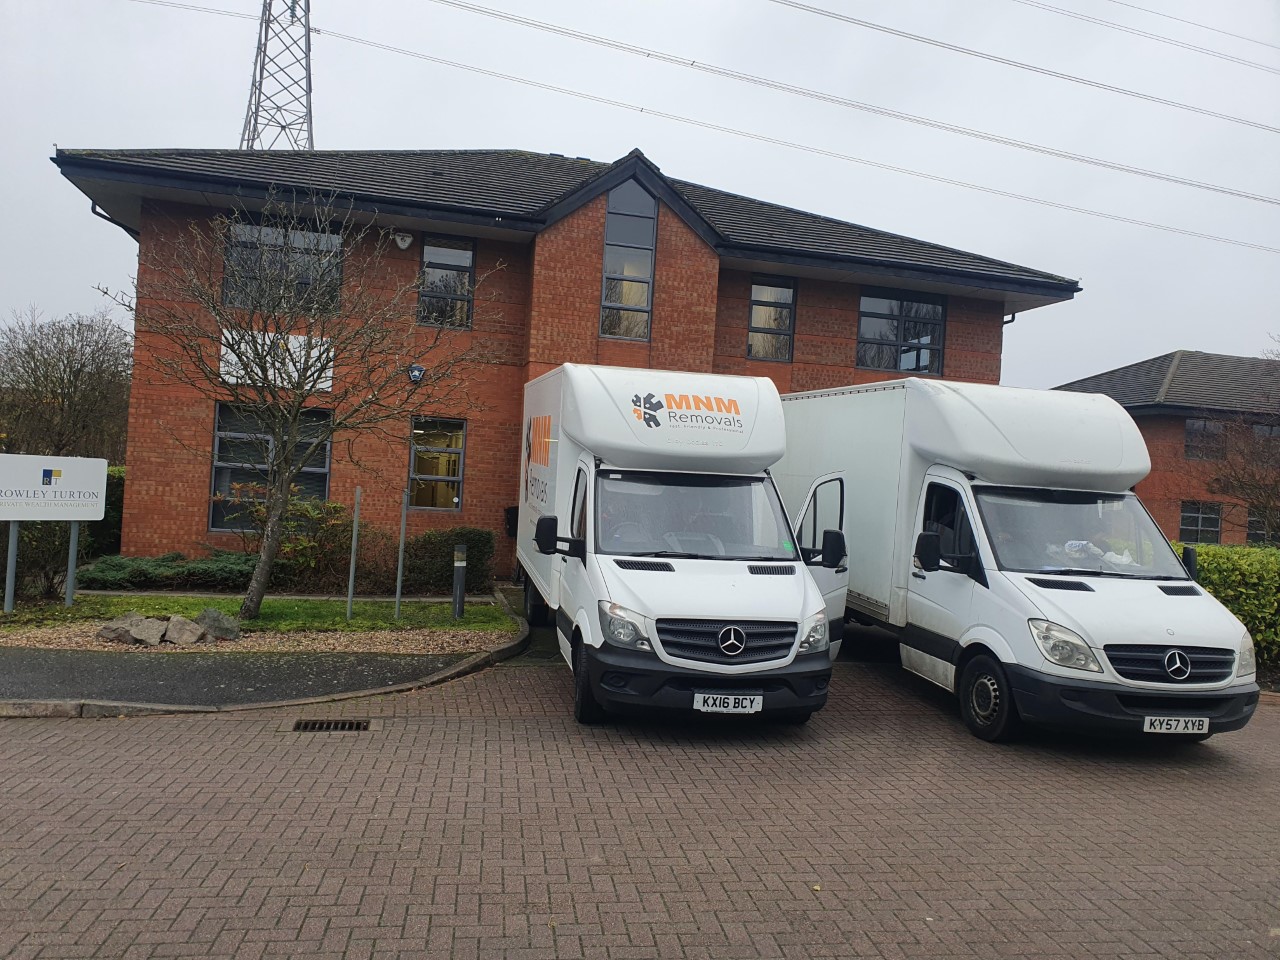 House & Office Removals - Moving In Nottingham